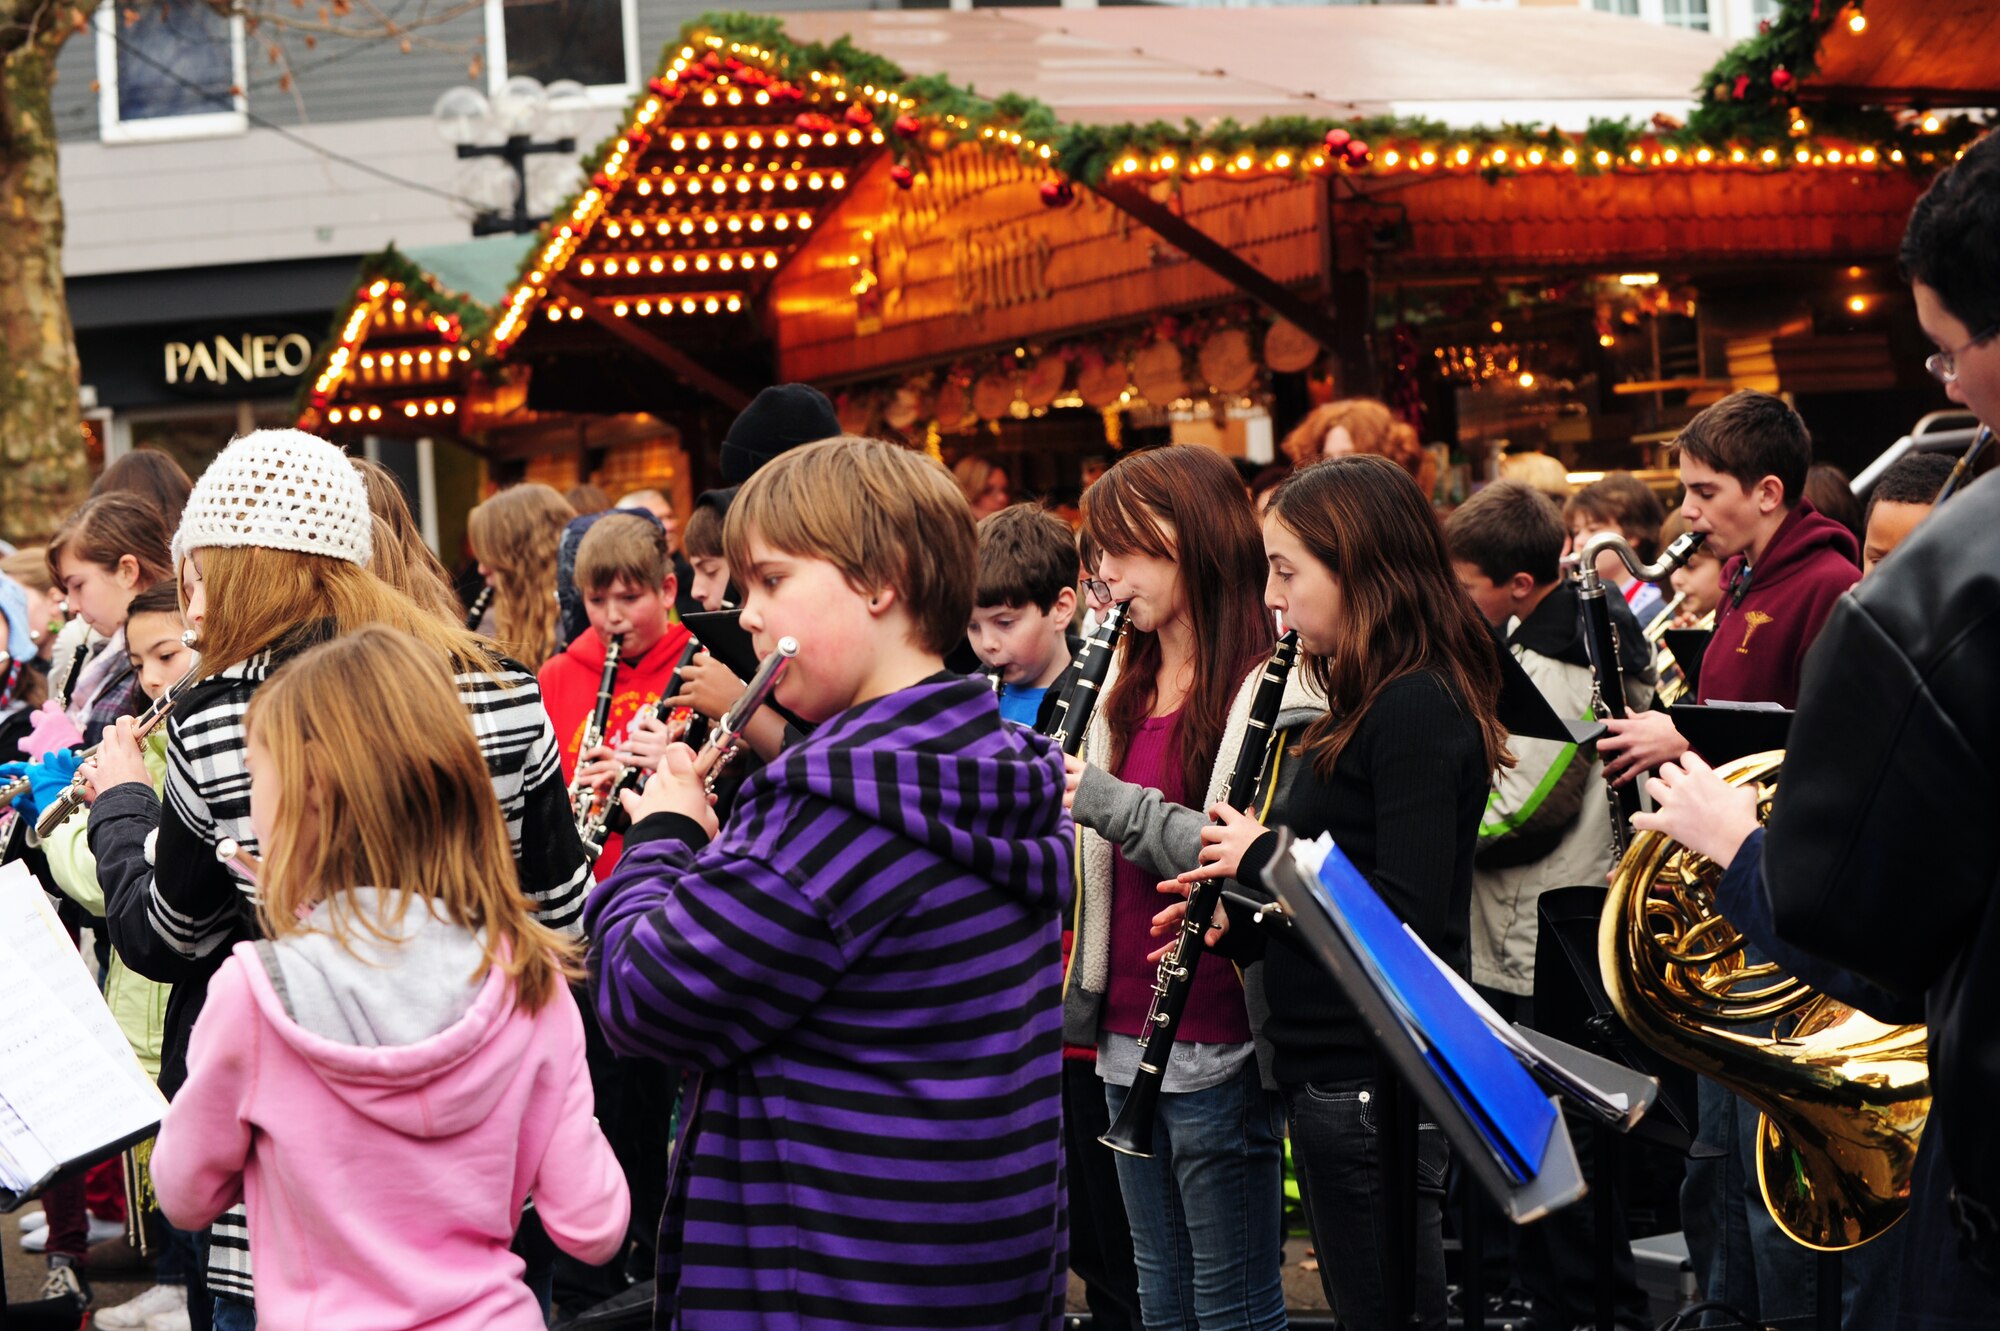 The Ramstein Middle School intermediate and advance band performs for the German and American community during the Christmas market in Kaiserslautern, Germany, Dec. 1, 2011. The market will be set up until Dec. 23 near Stiftskirche str. and on Schillerplatz str. (U.S. Air Force photo by Senior Airman Aaron-Forrest Wainwright)